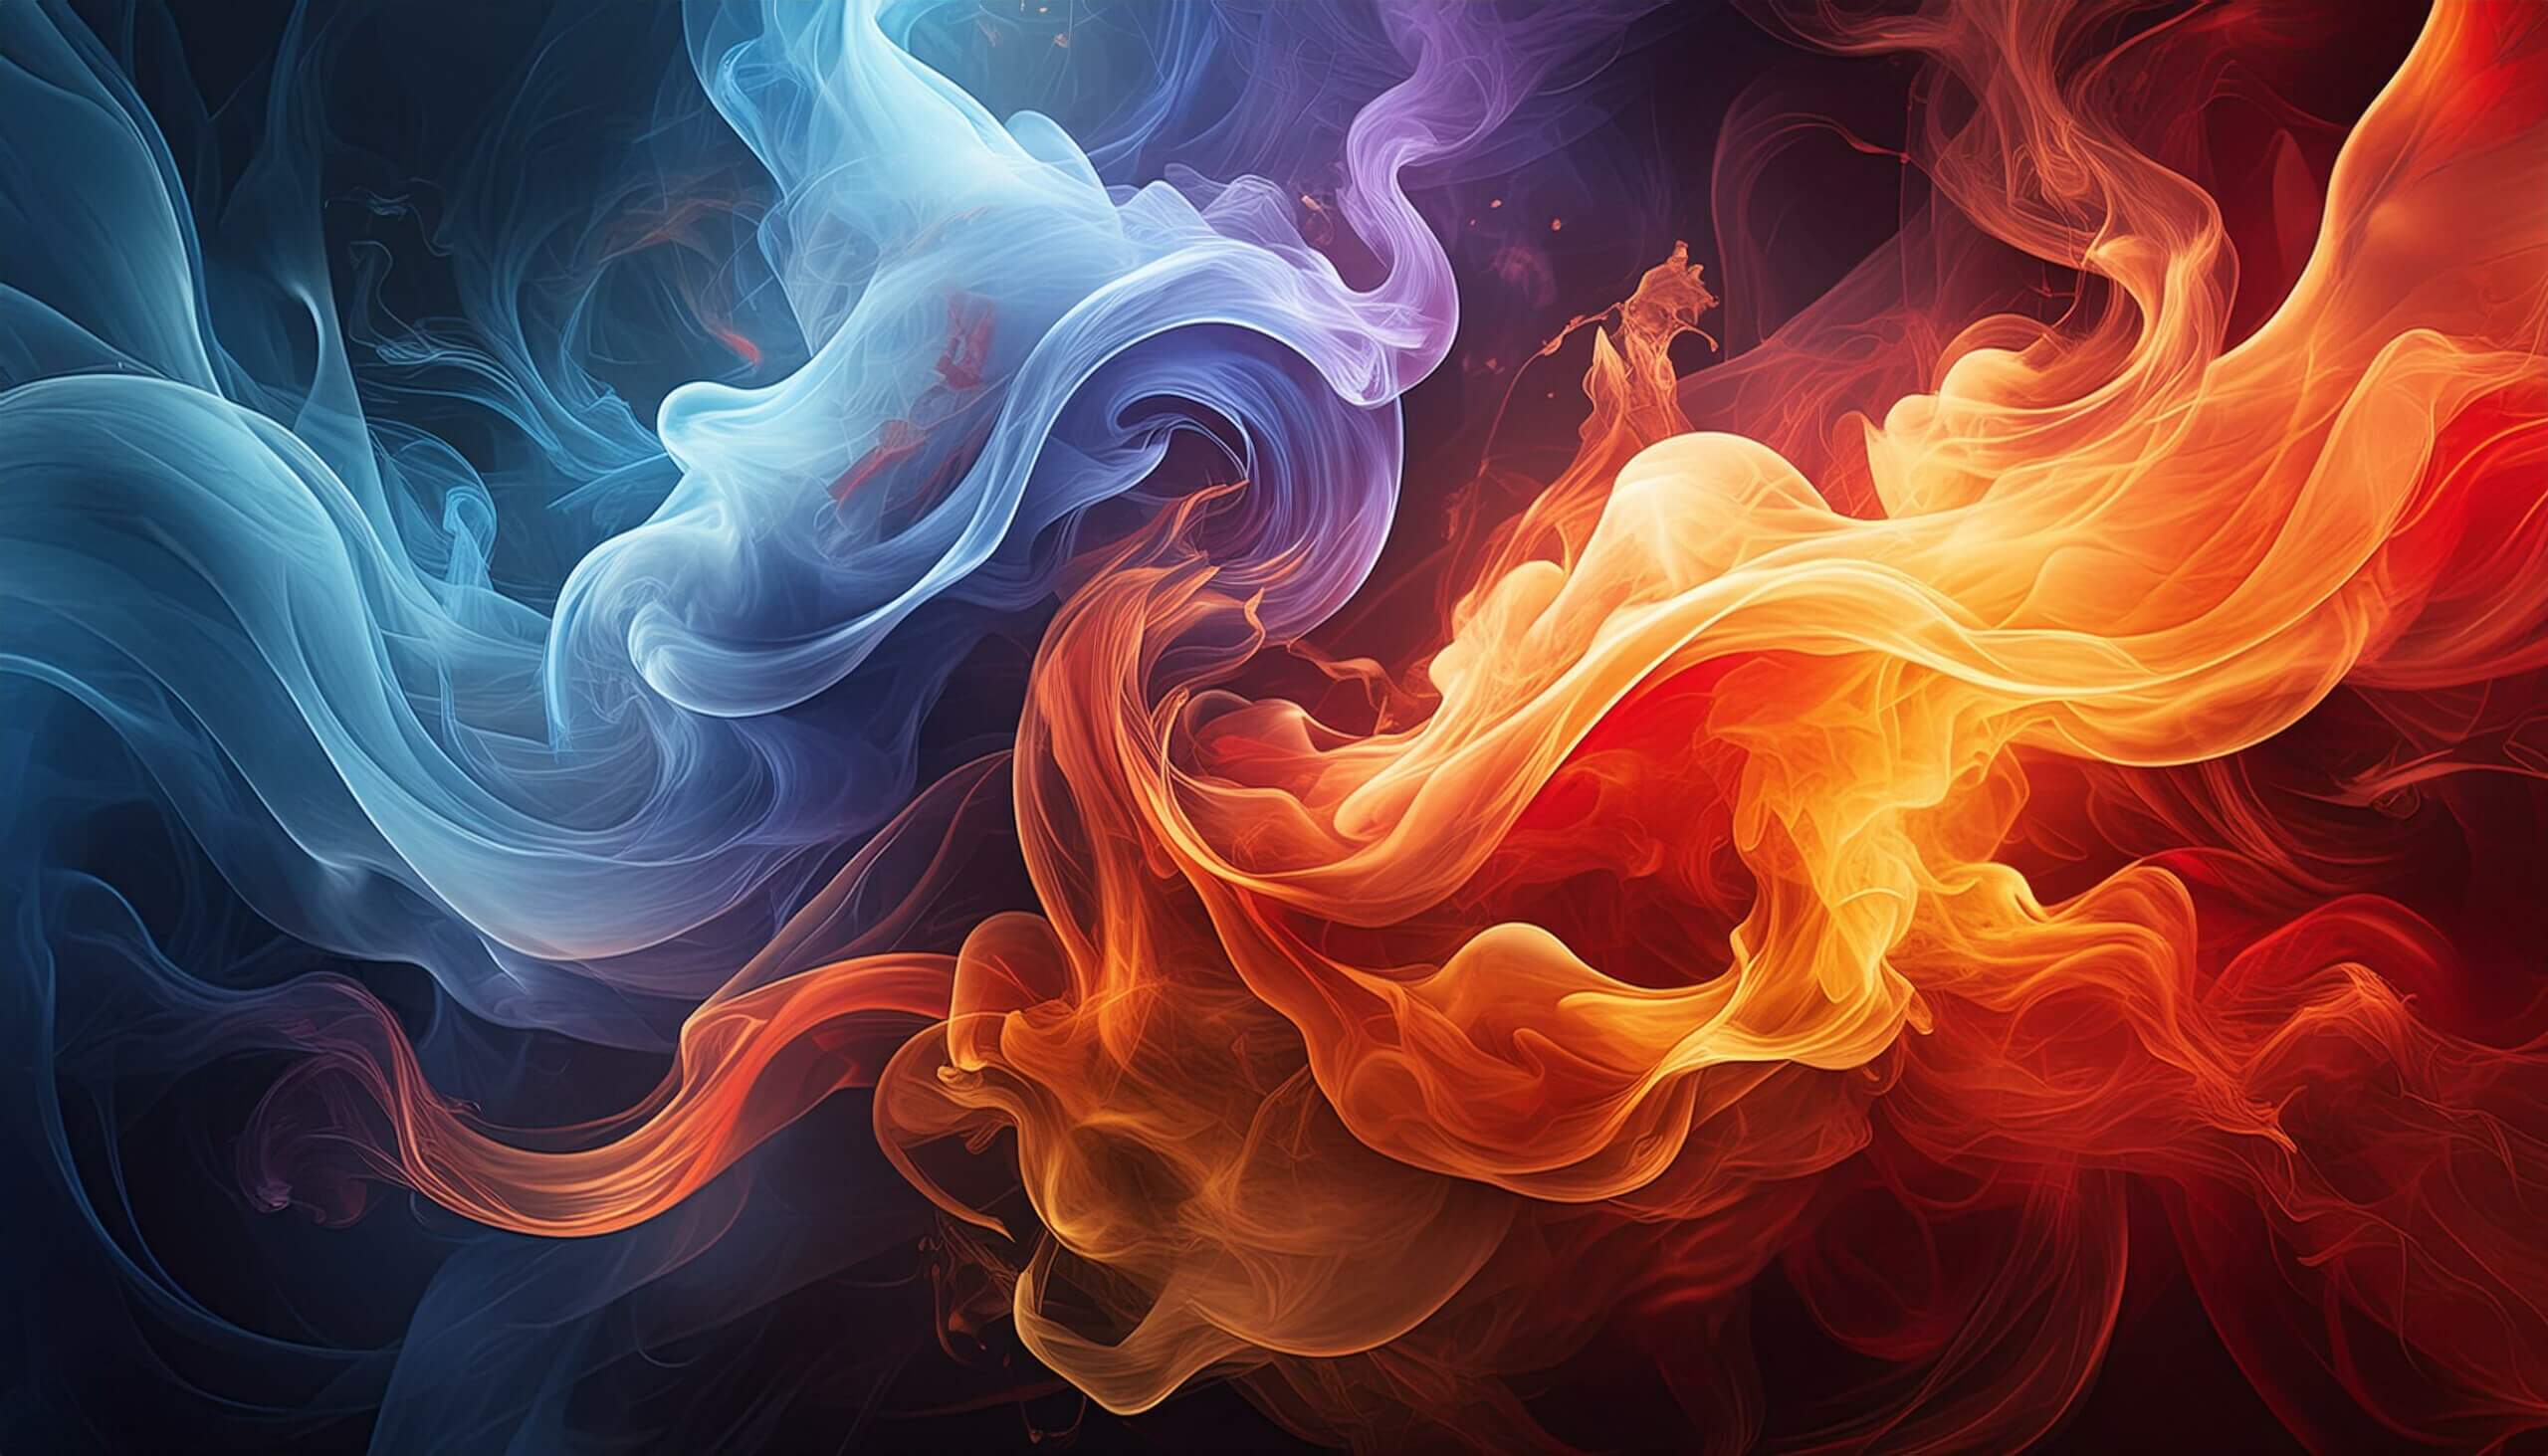 Blue and orange smoke swirling together to illustrate dueling ideals